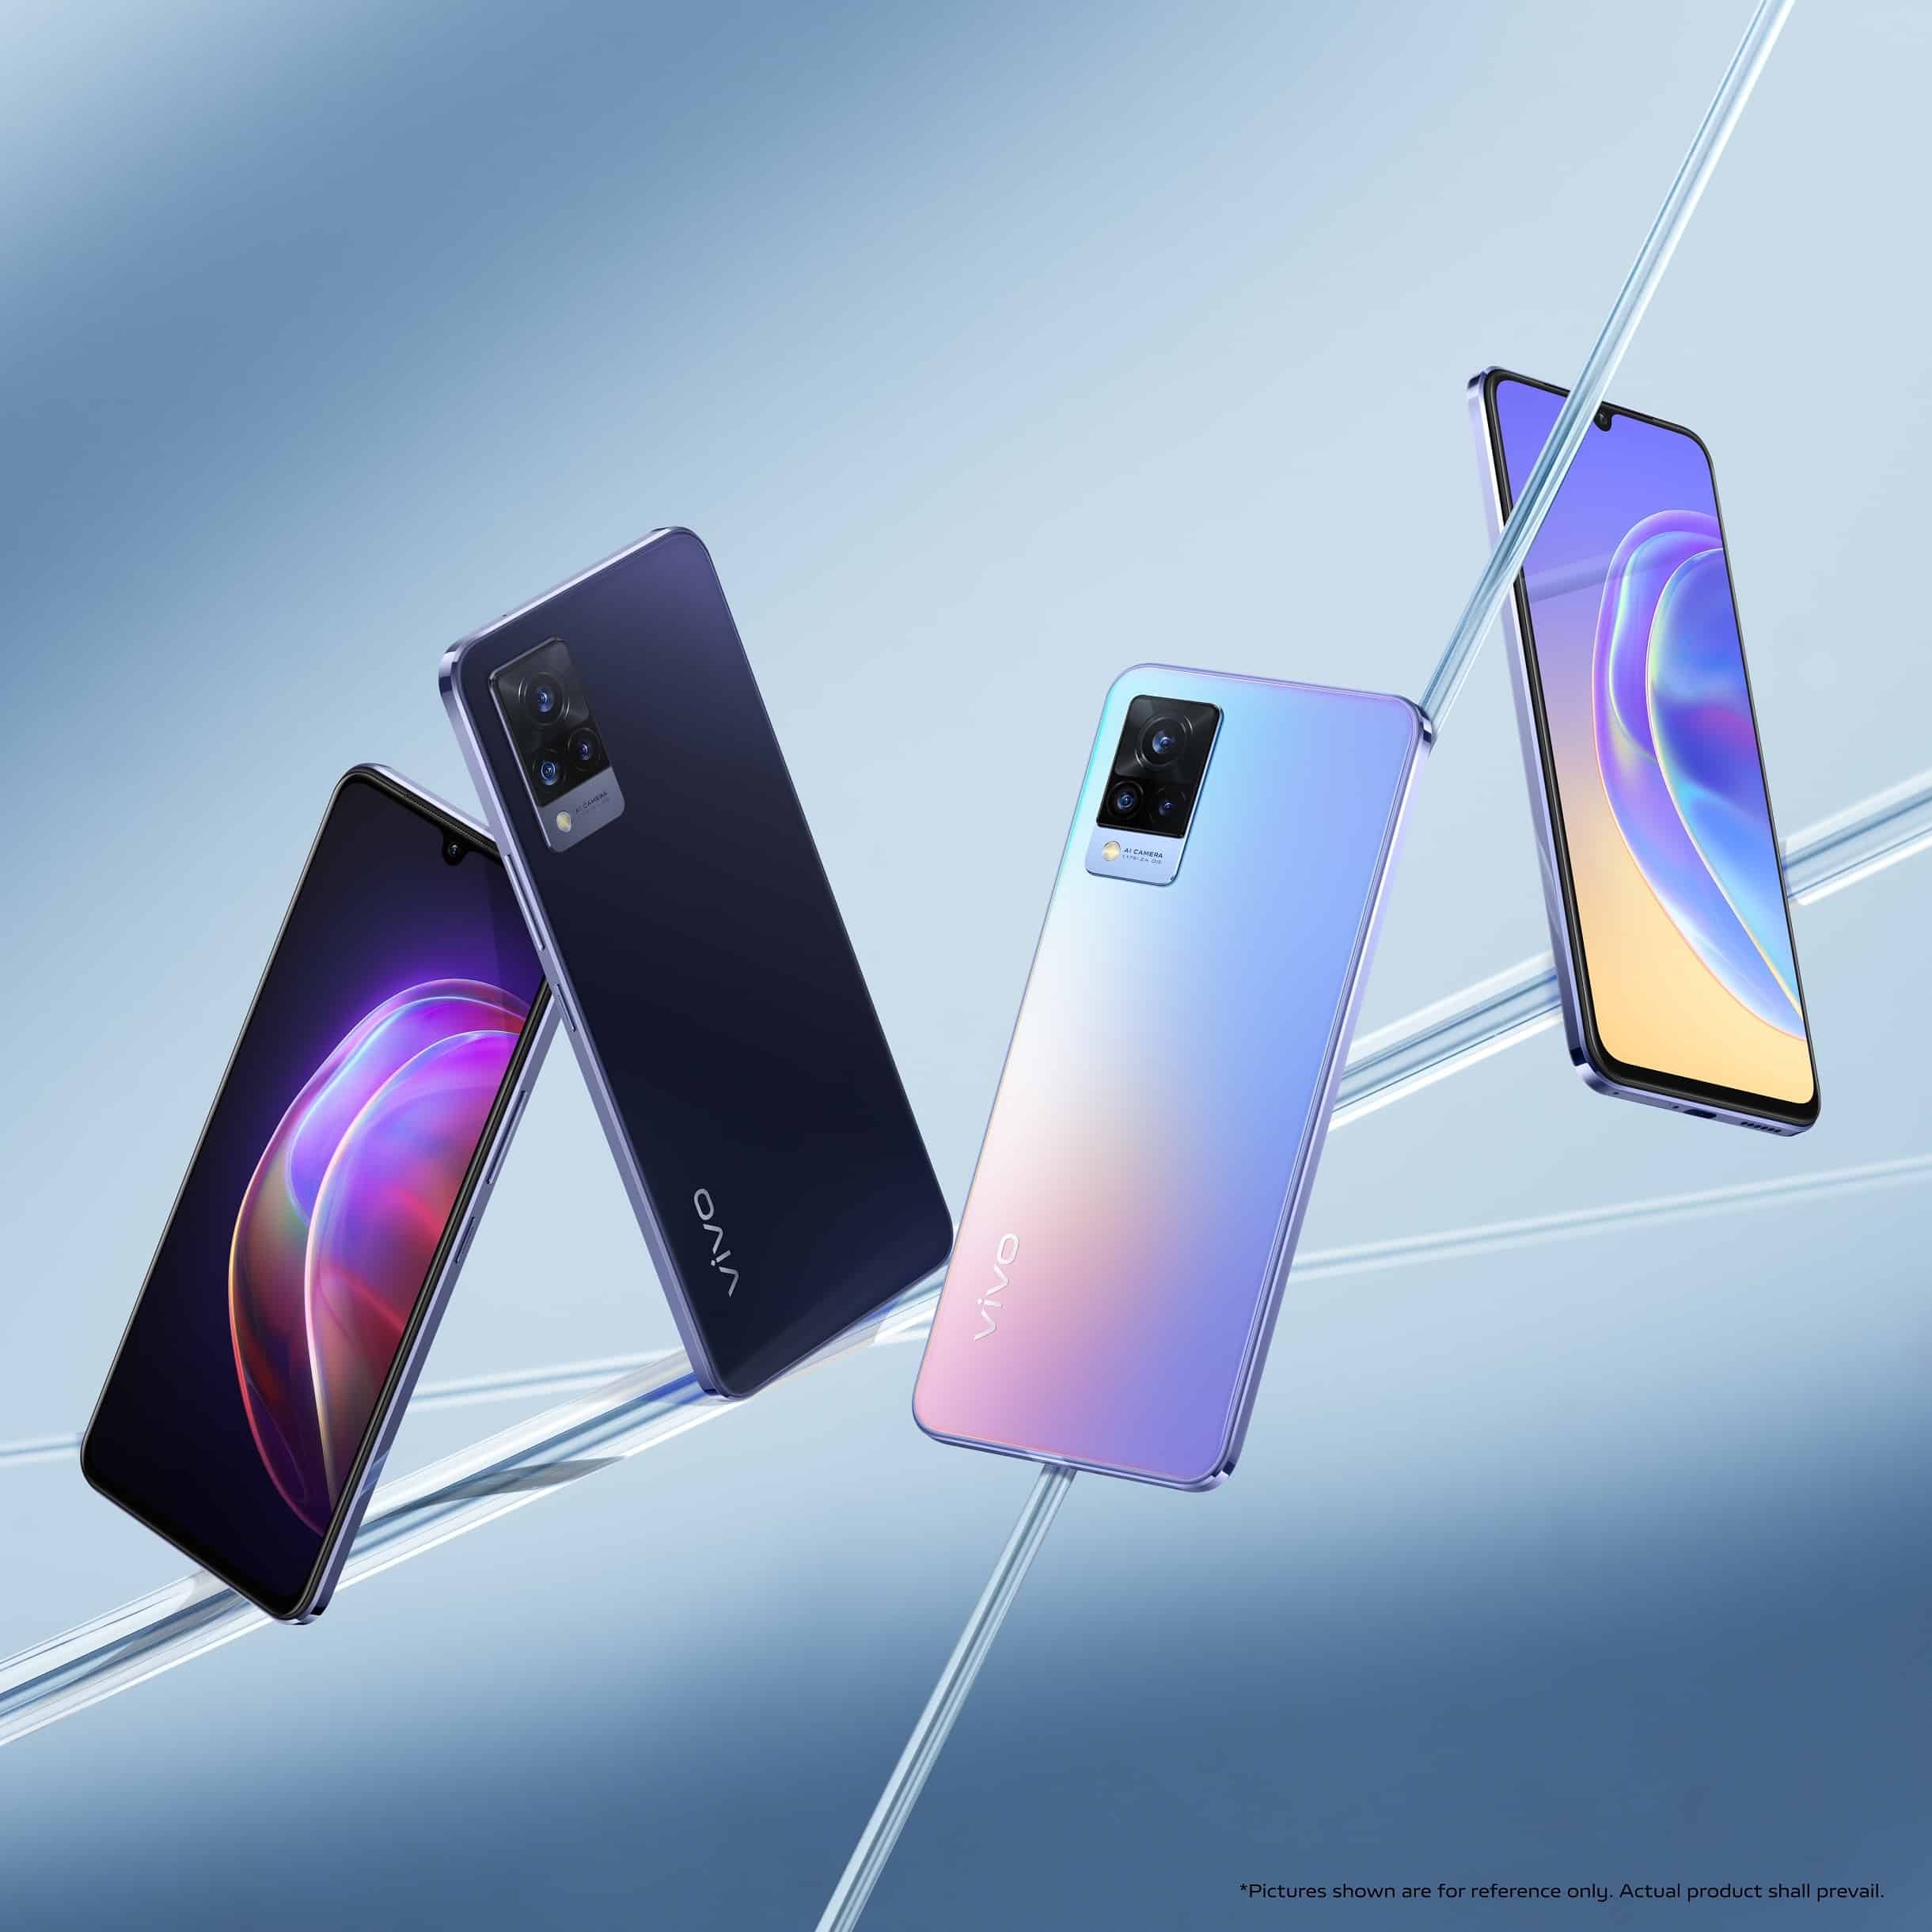 Canalys report places Vivo among the Top 5 global smartphone brands in Q2 2021